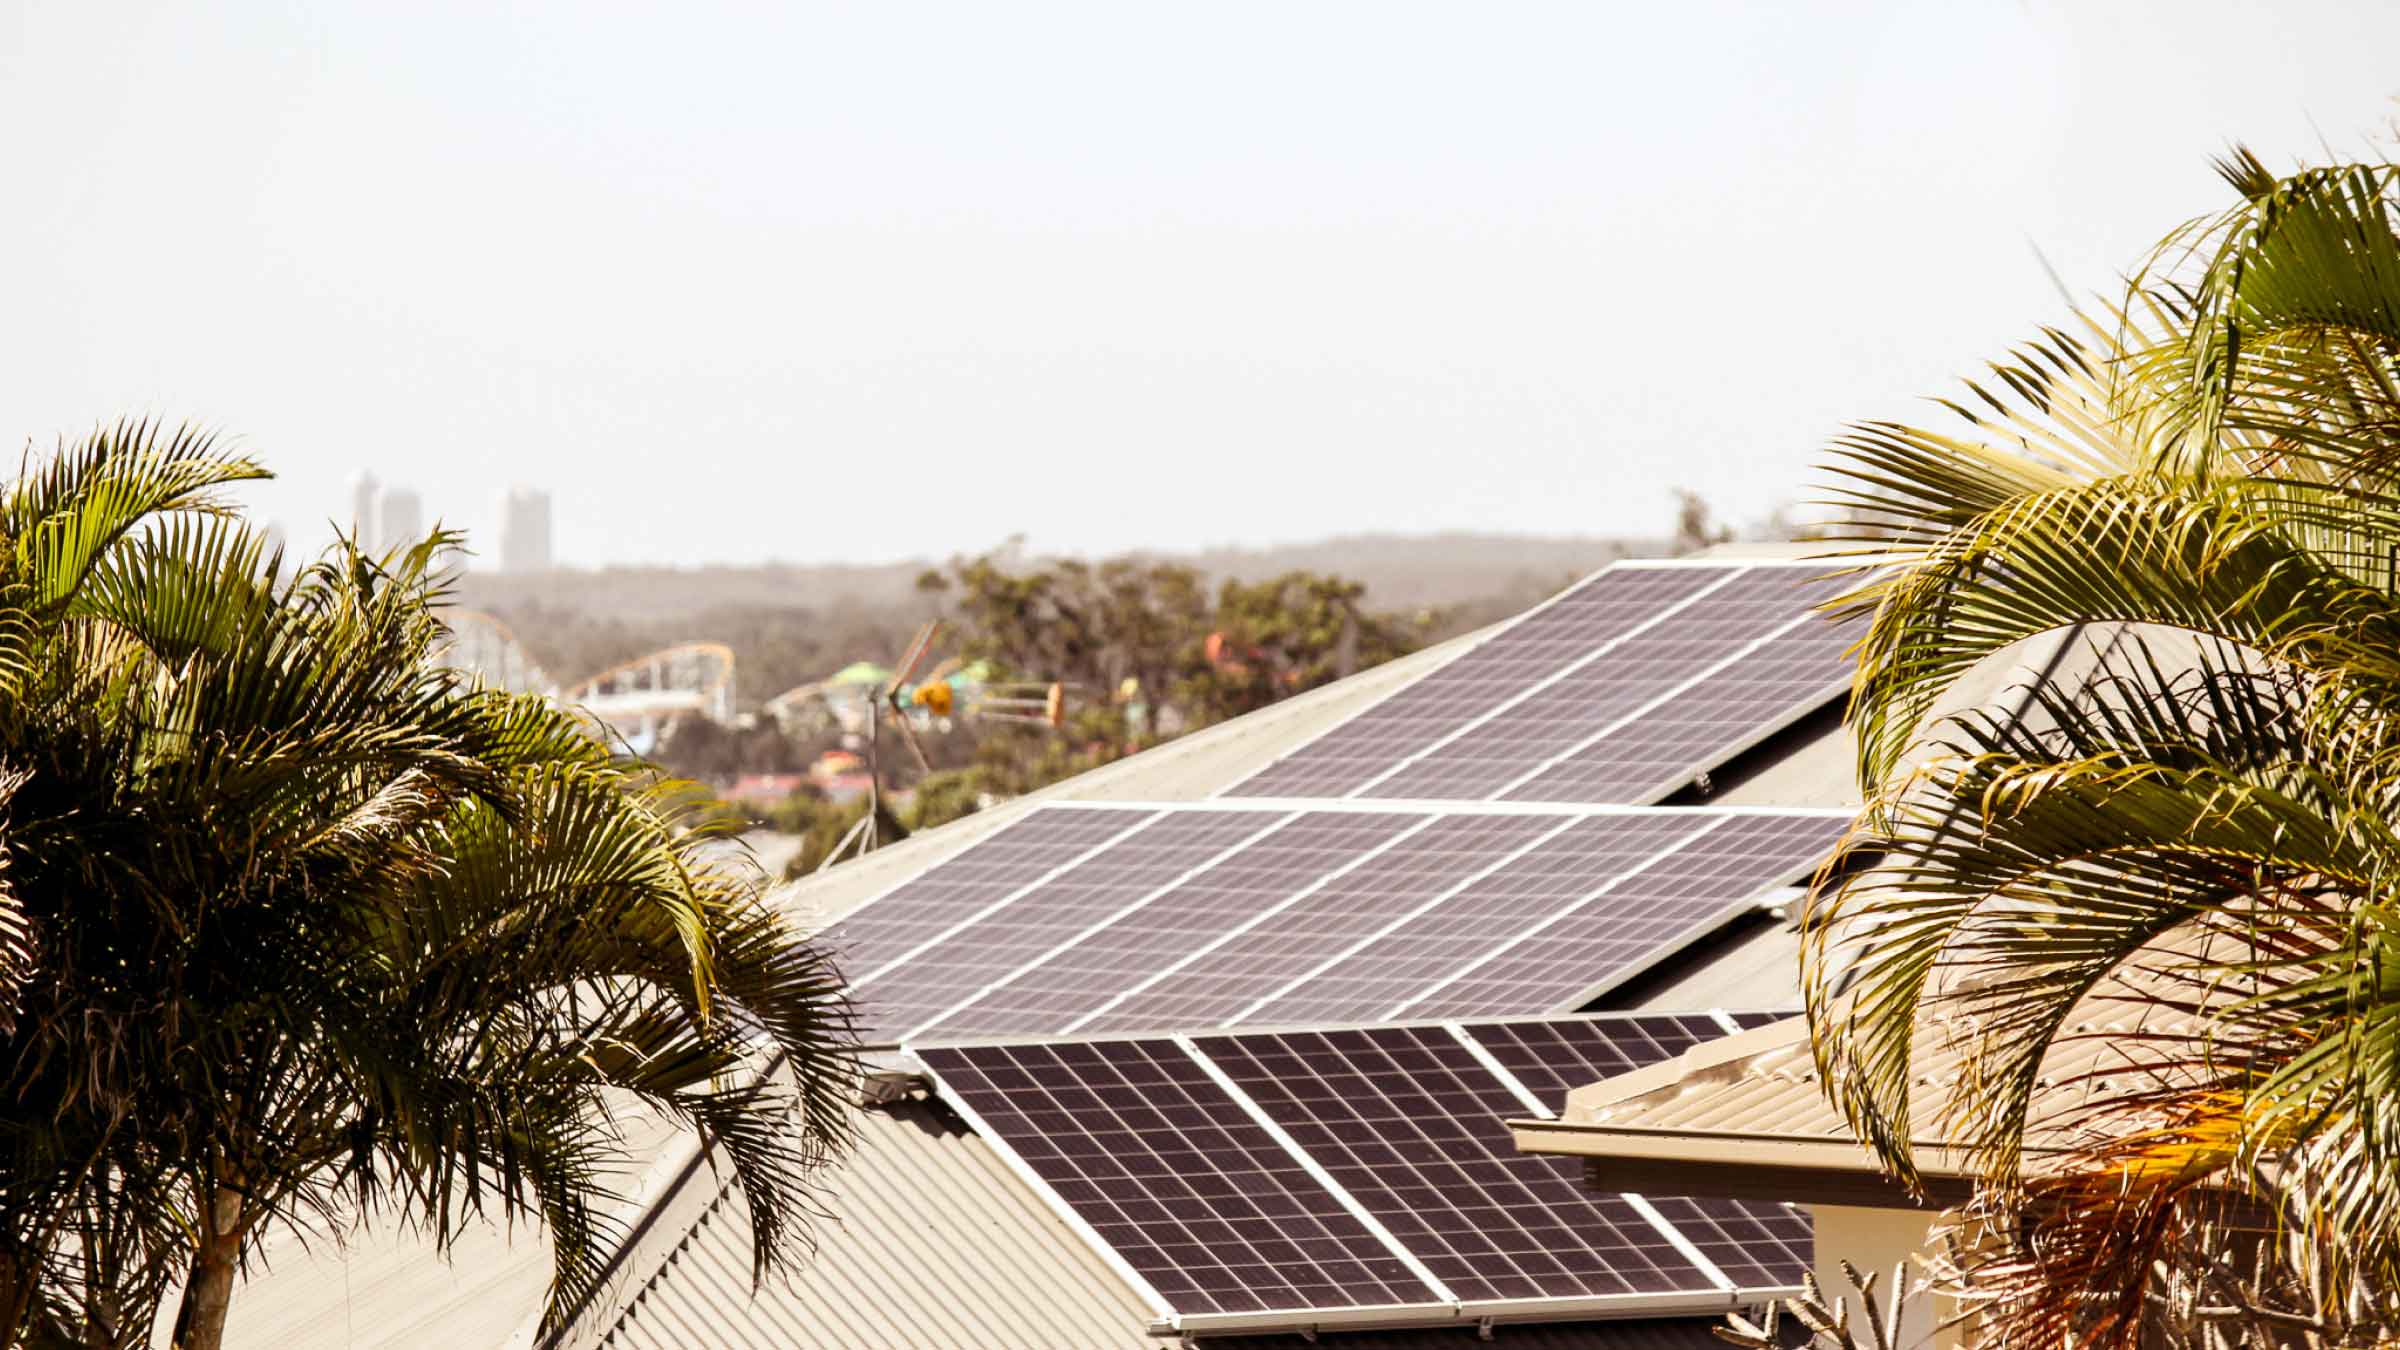 Suburban rooftops with solar panels installed, palm trees frame the photo on both sides, on a hazy afternoon.